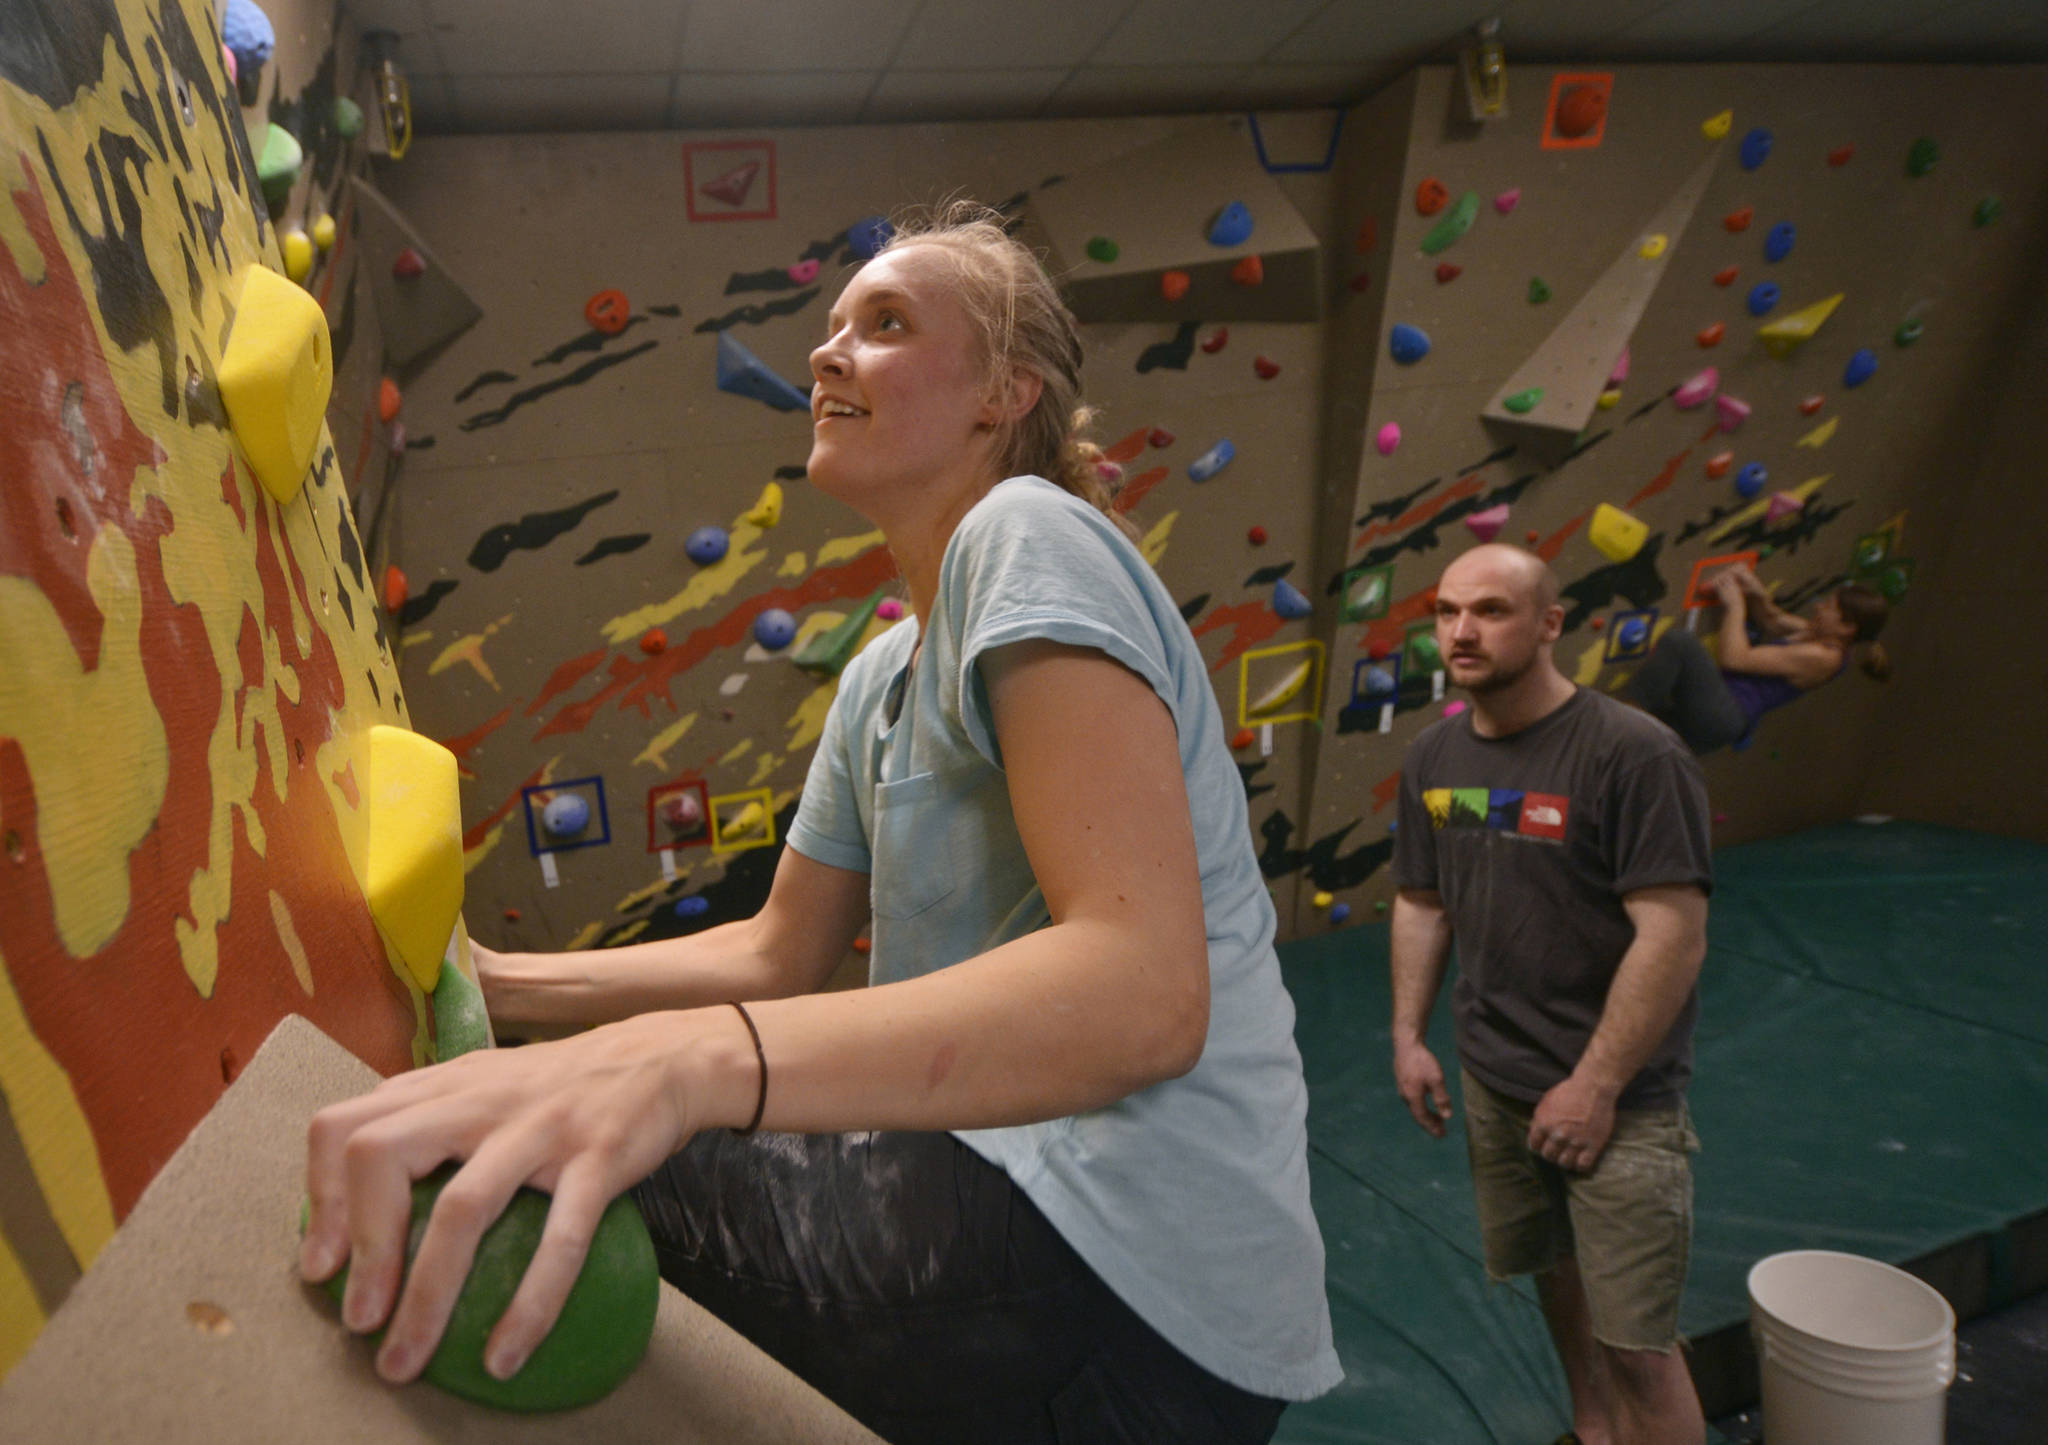 Rock wall offers new ascent for peninsula climbers